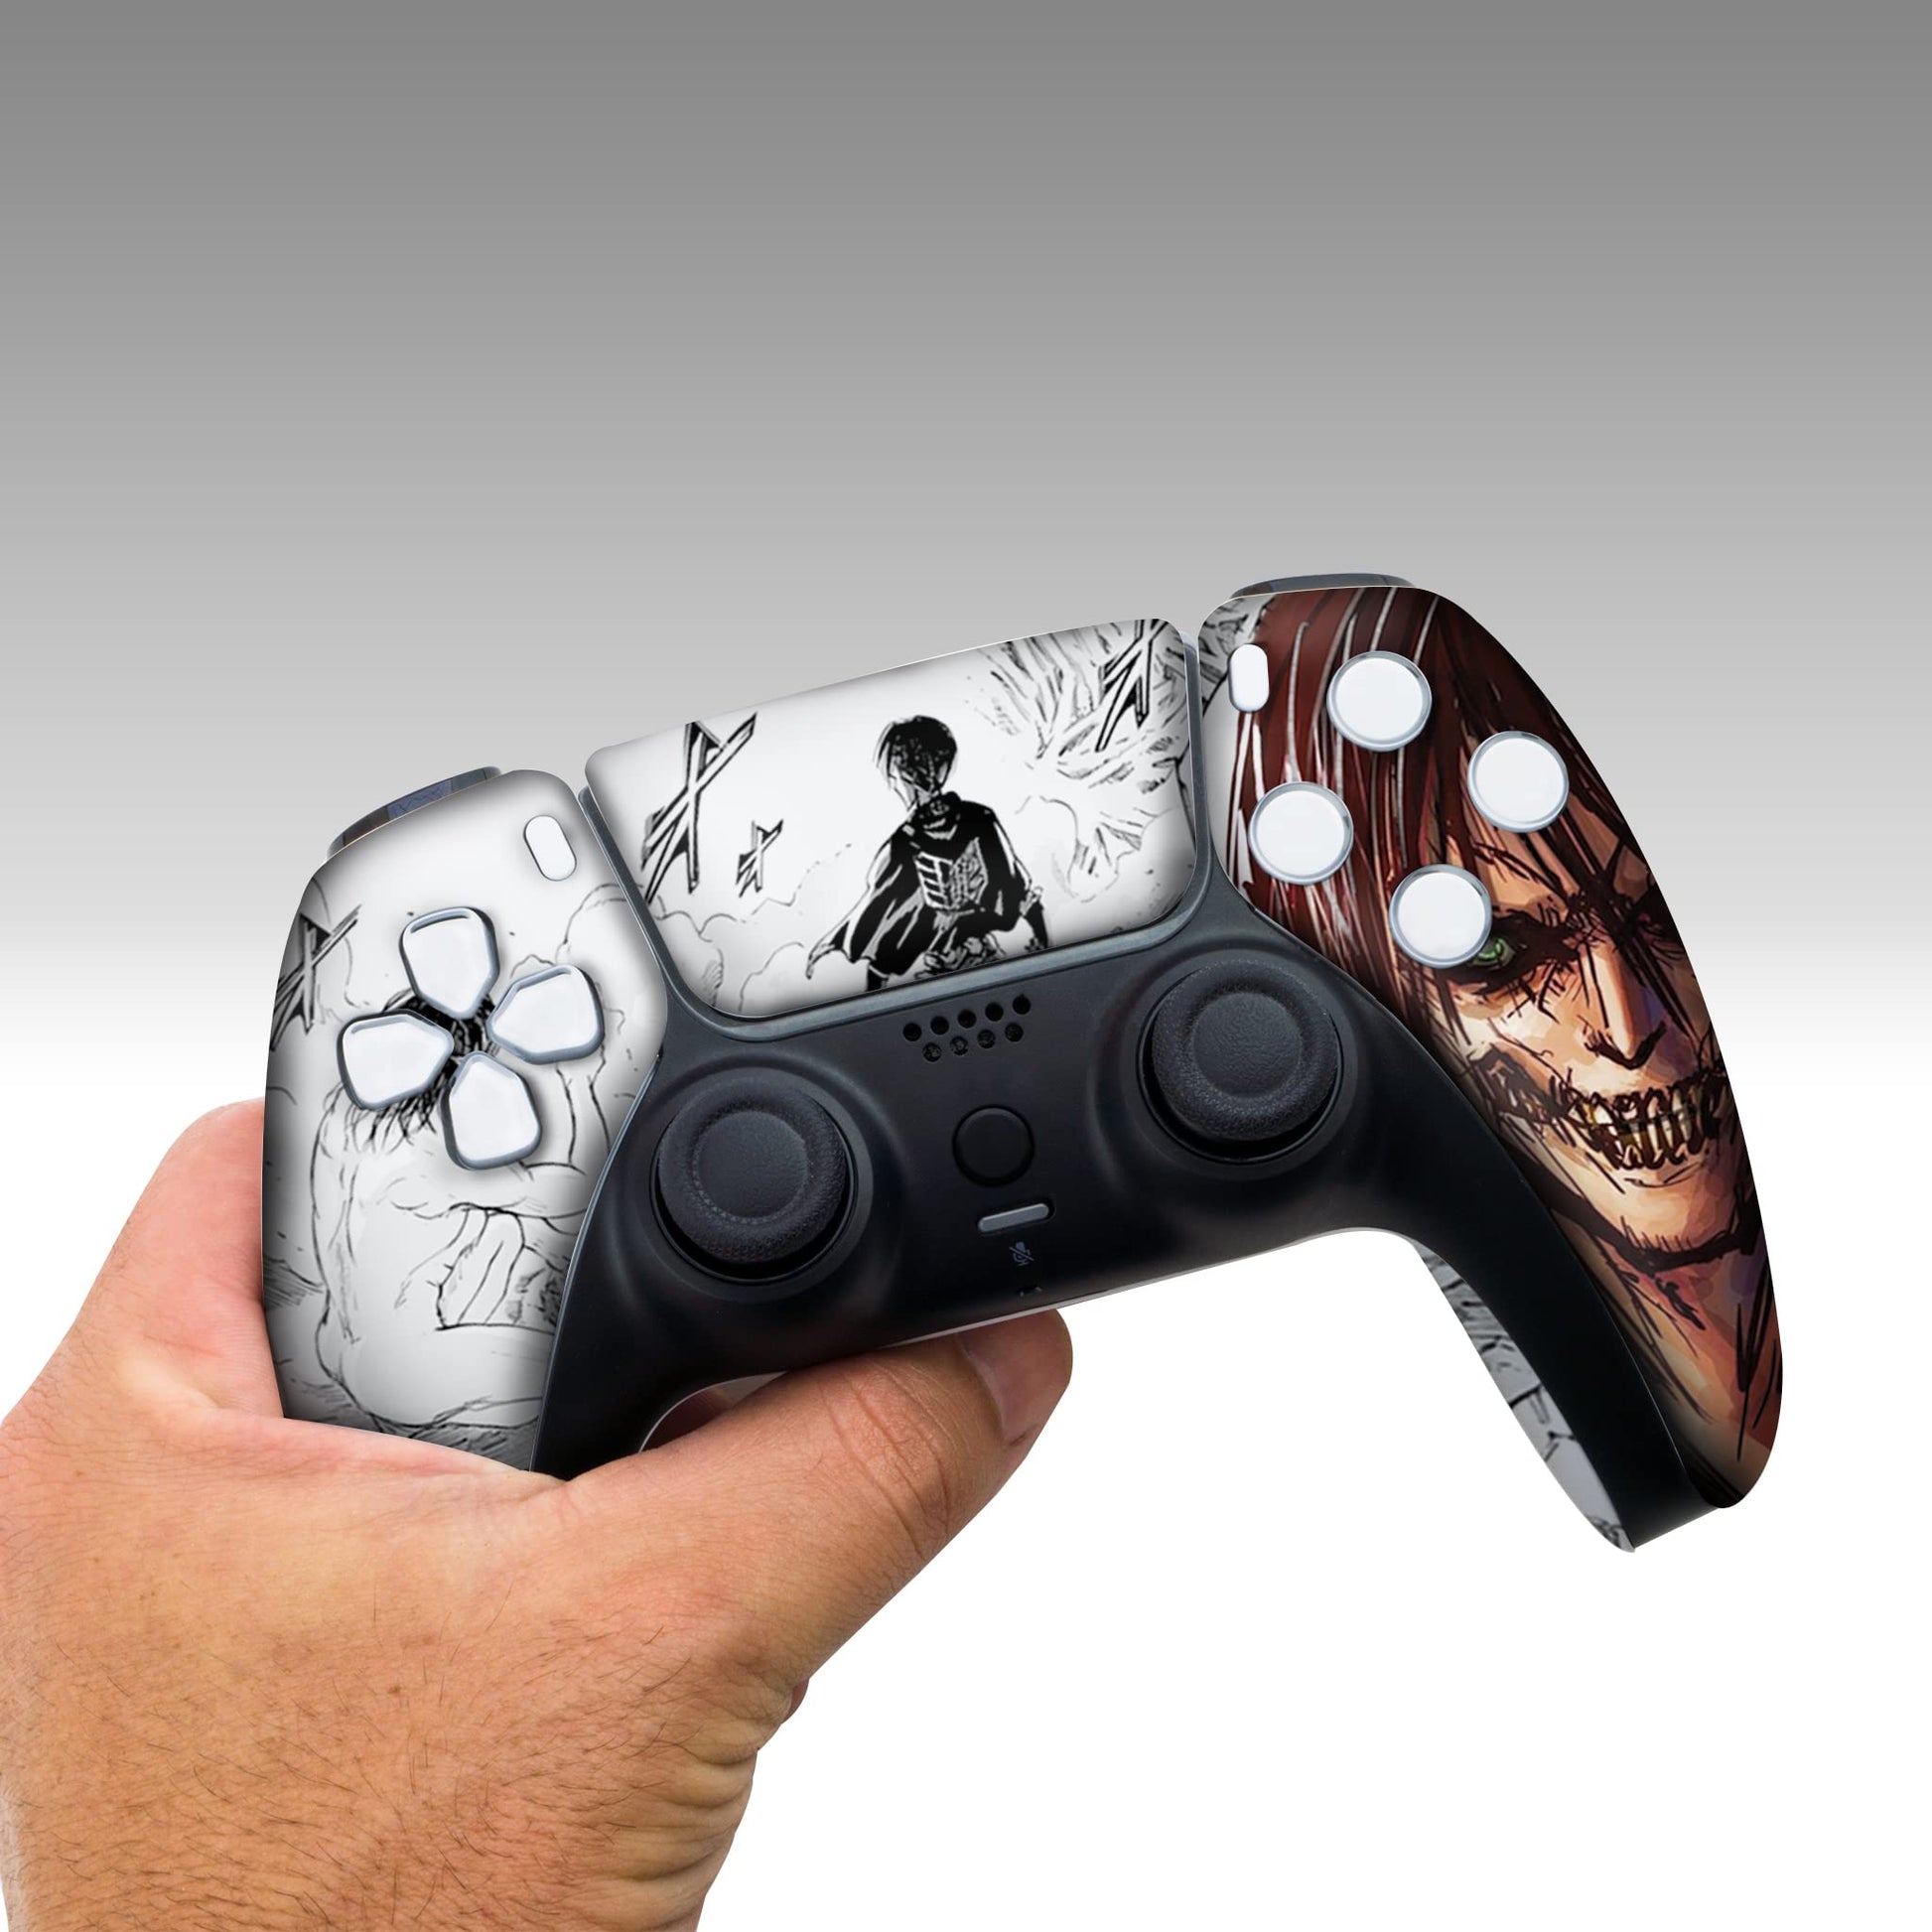 Attackk On Titan Custom PS-5 Controller Wireless compatible with Play-Station 5 Console by BCB Controllers | Proudly Customized in USA with Permanent HYDRO-DIP Printing (NOT JUST A SKIN) - amzGamess